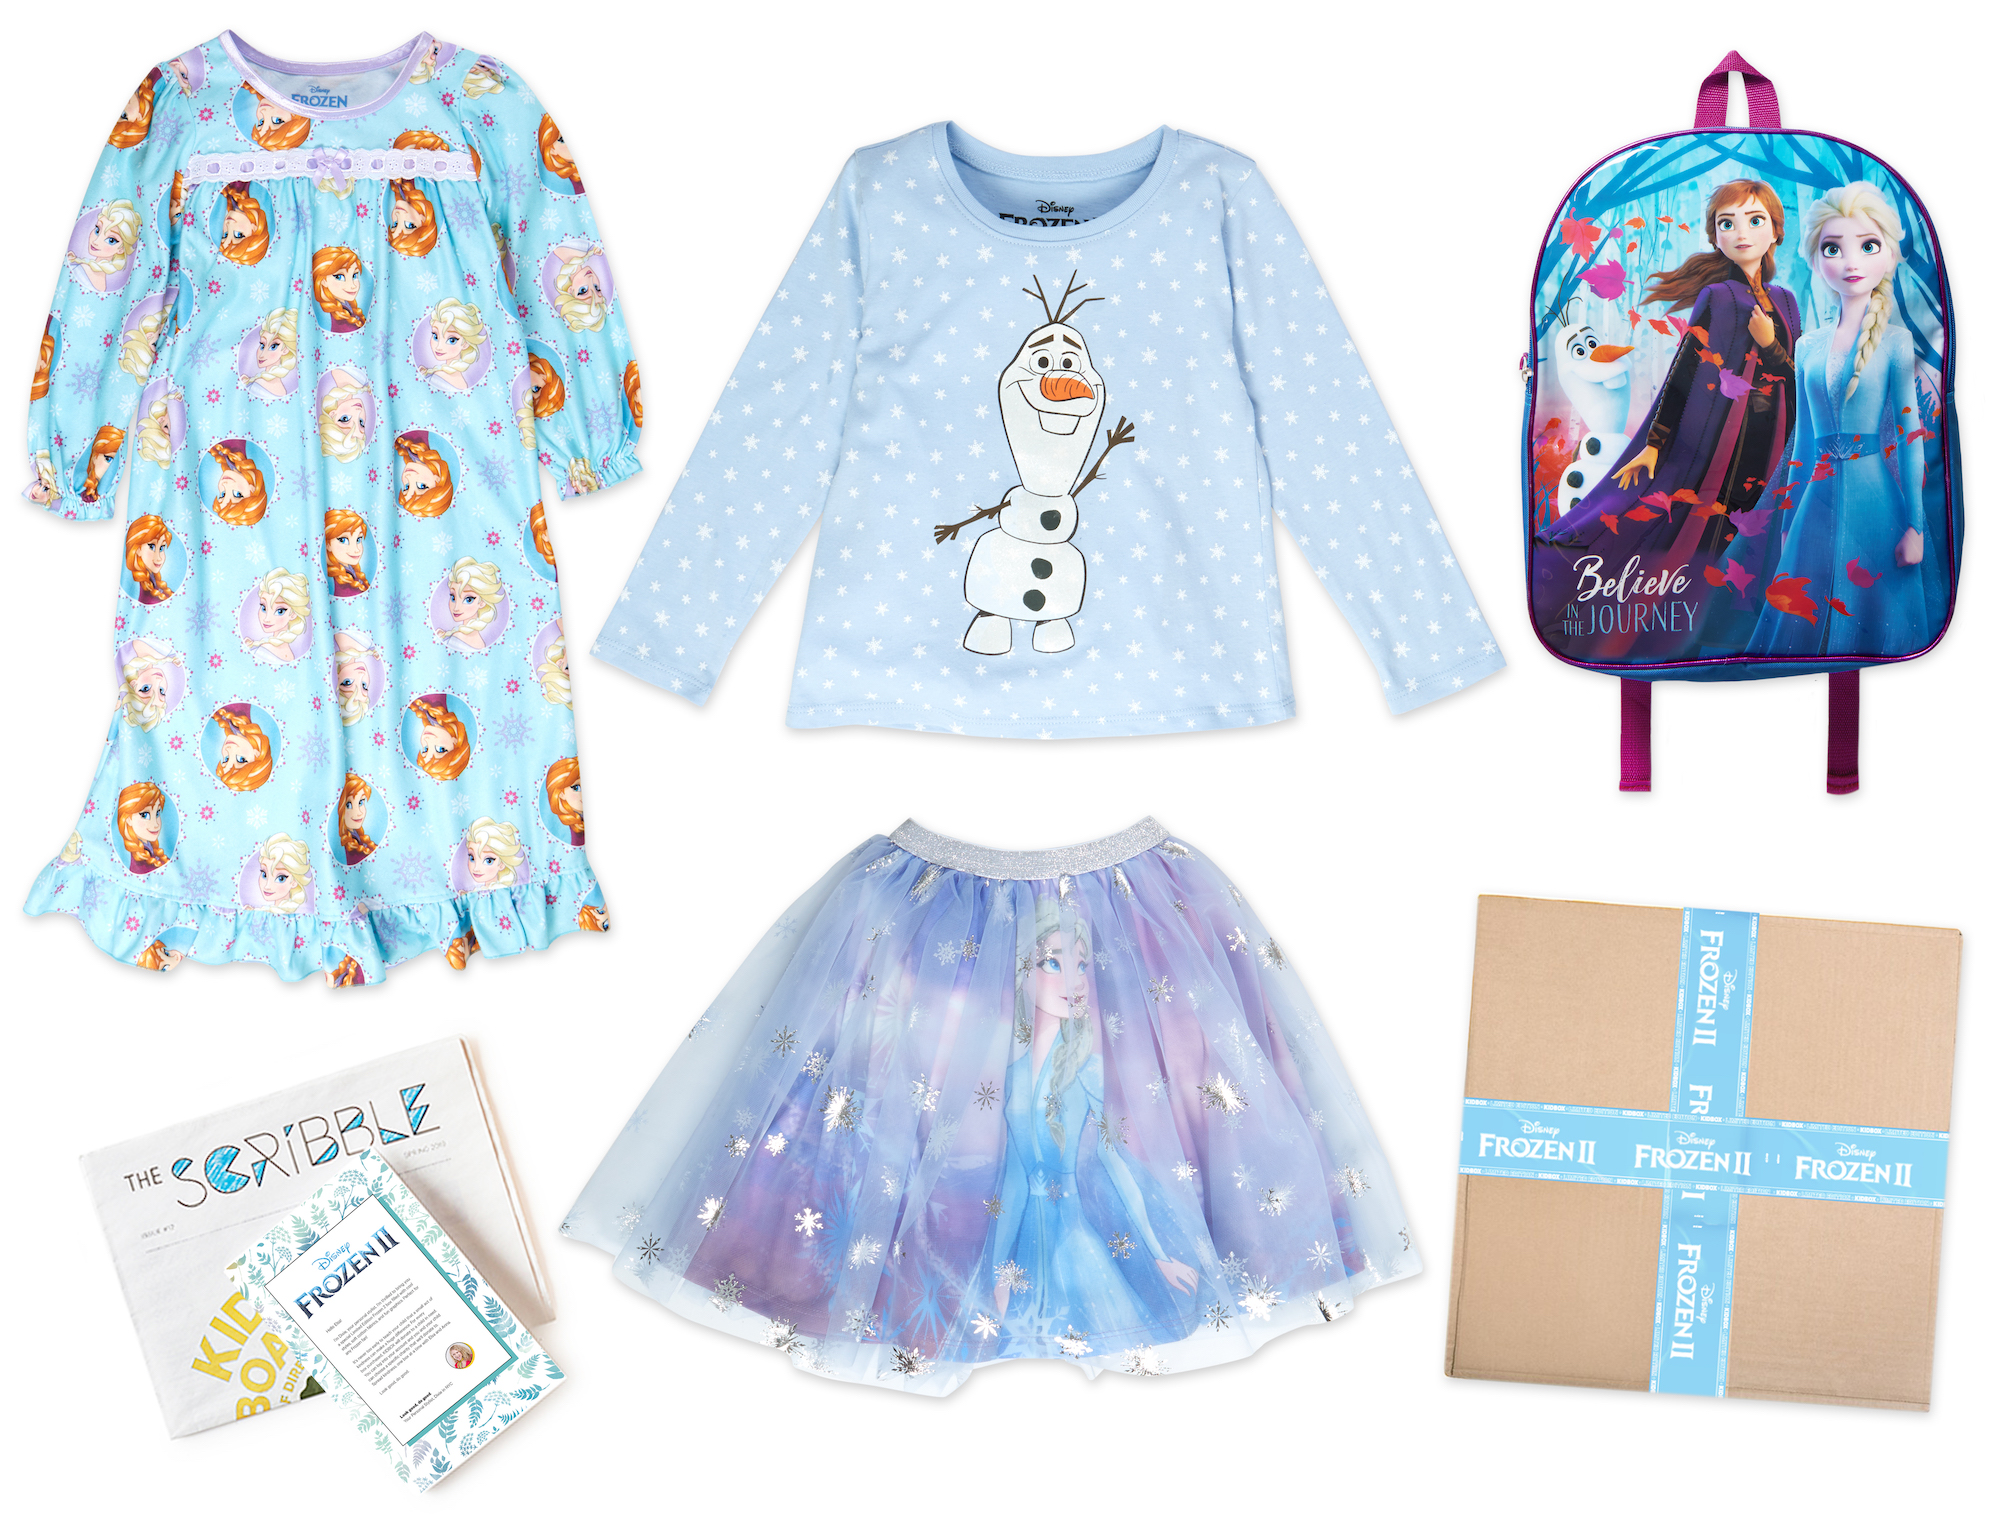 New Frozen Style Box From KIDBOX Plus A New Star Wars Style Box